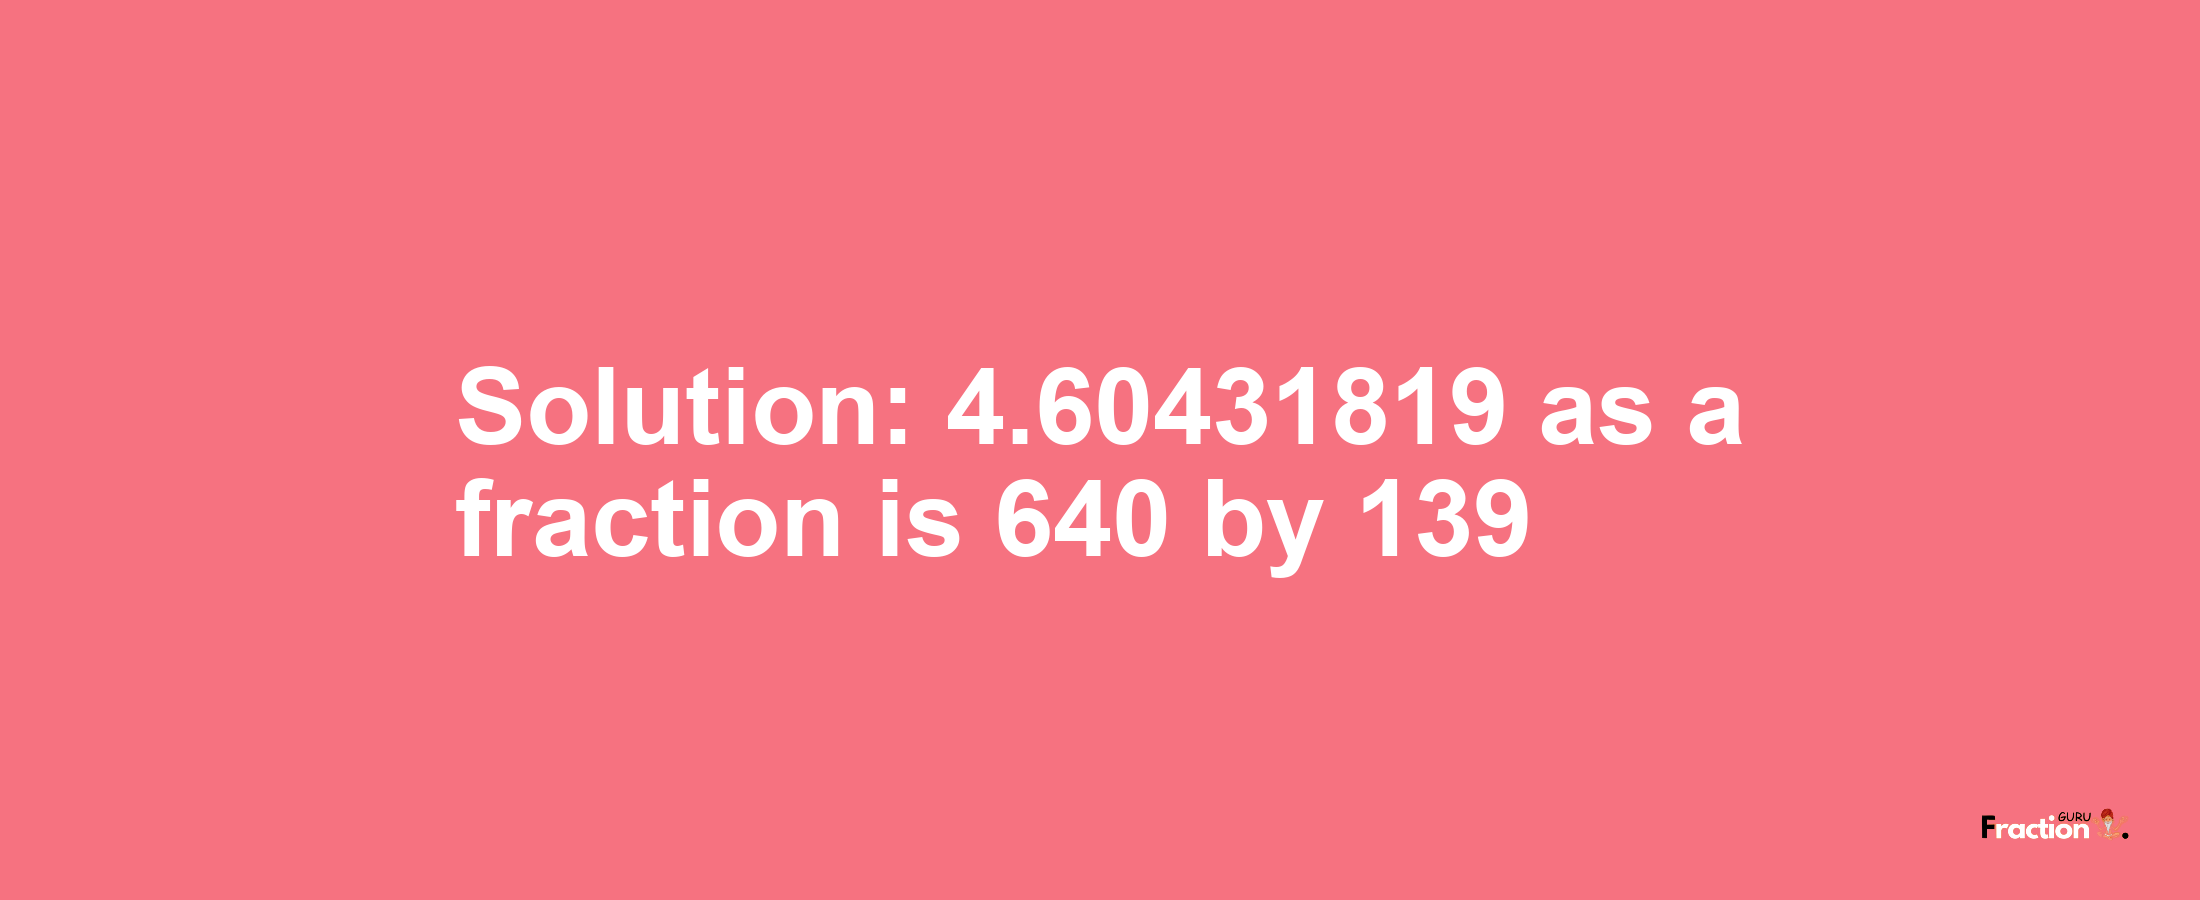 Solution:4.60431819 as a fraction is 640/139